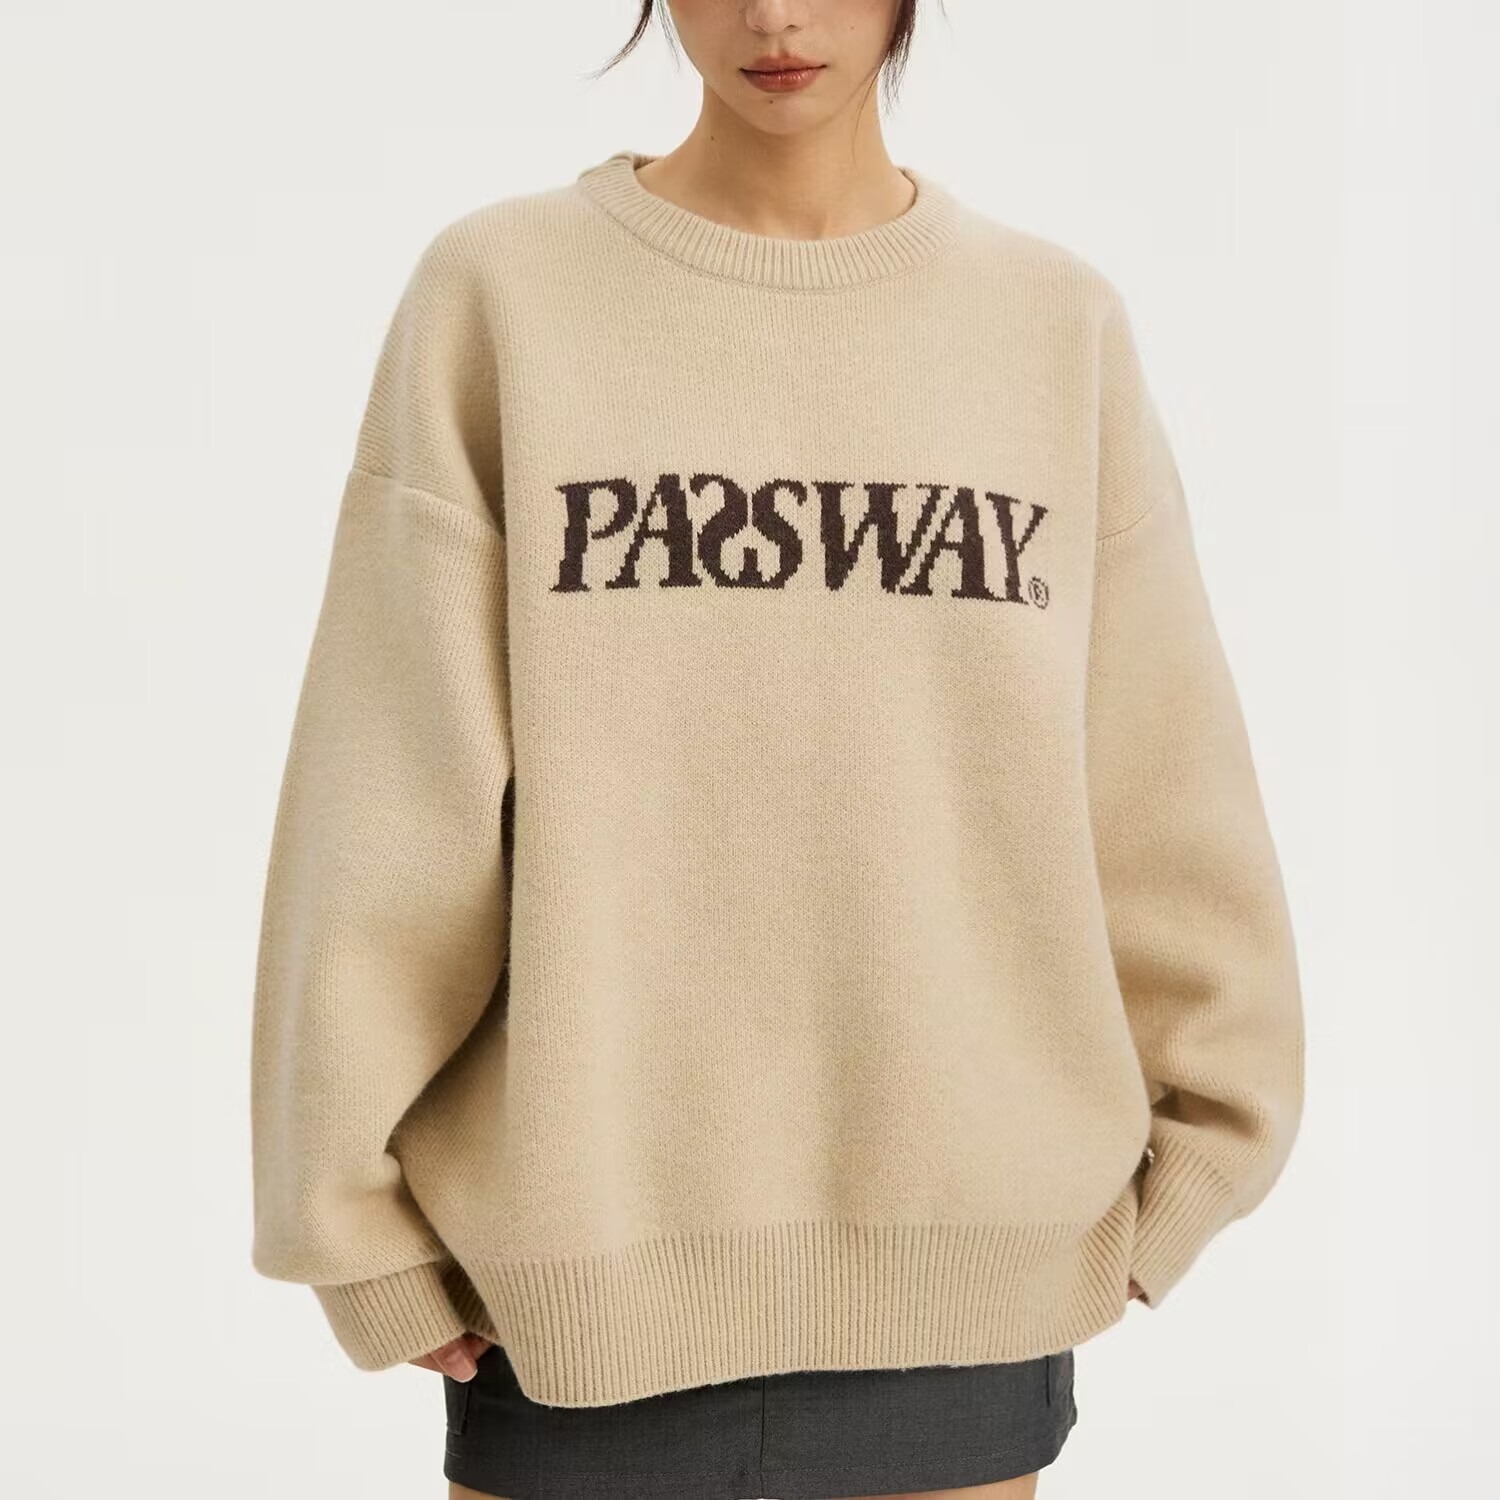 Retro long-sleeved sweater sweater women’s autumn and winter new style loose lazy style casual top